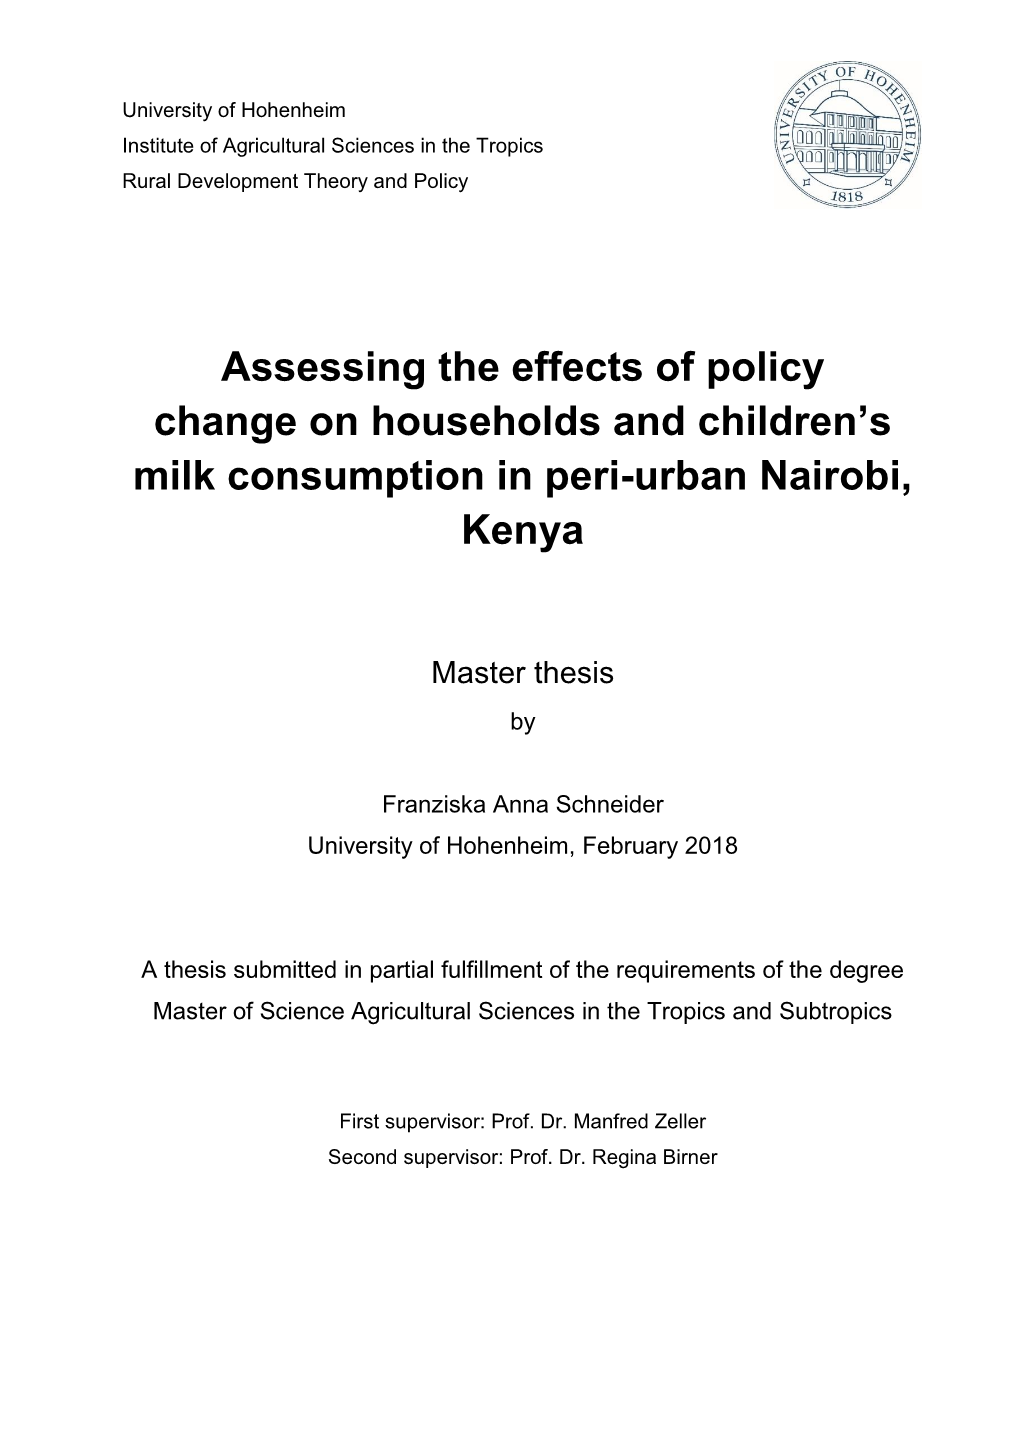 Assessing the Effects of Policy Change on Households and Children's Milk